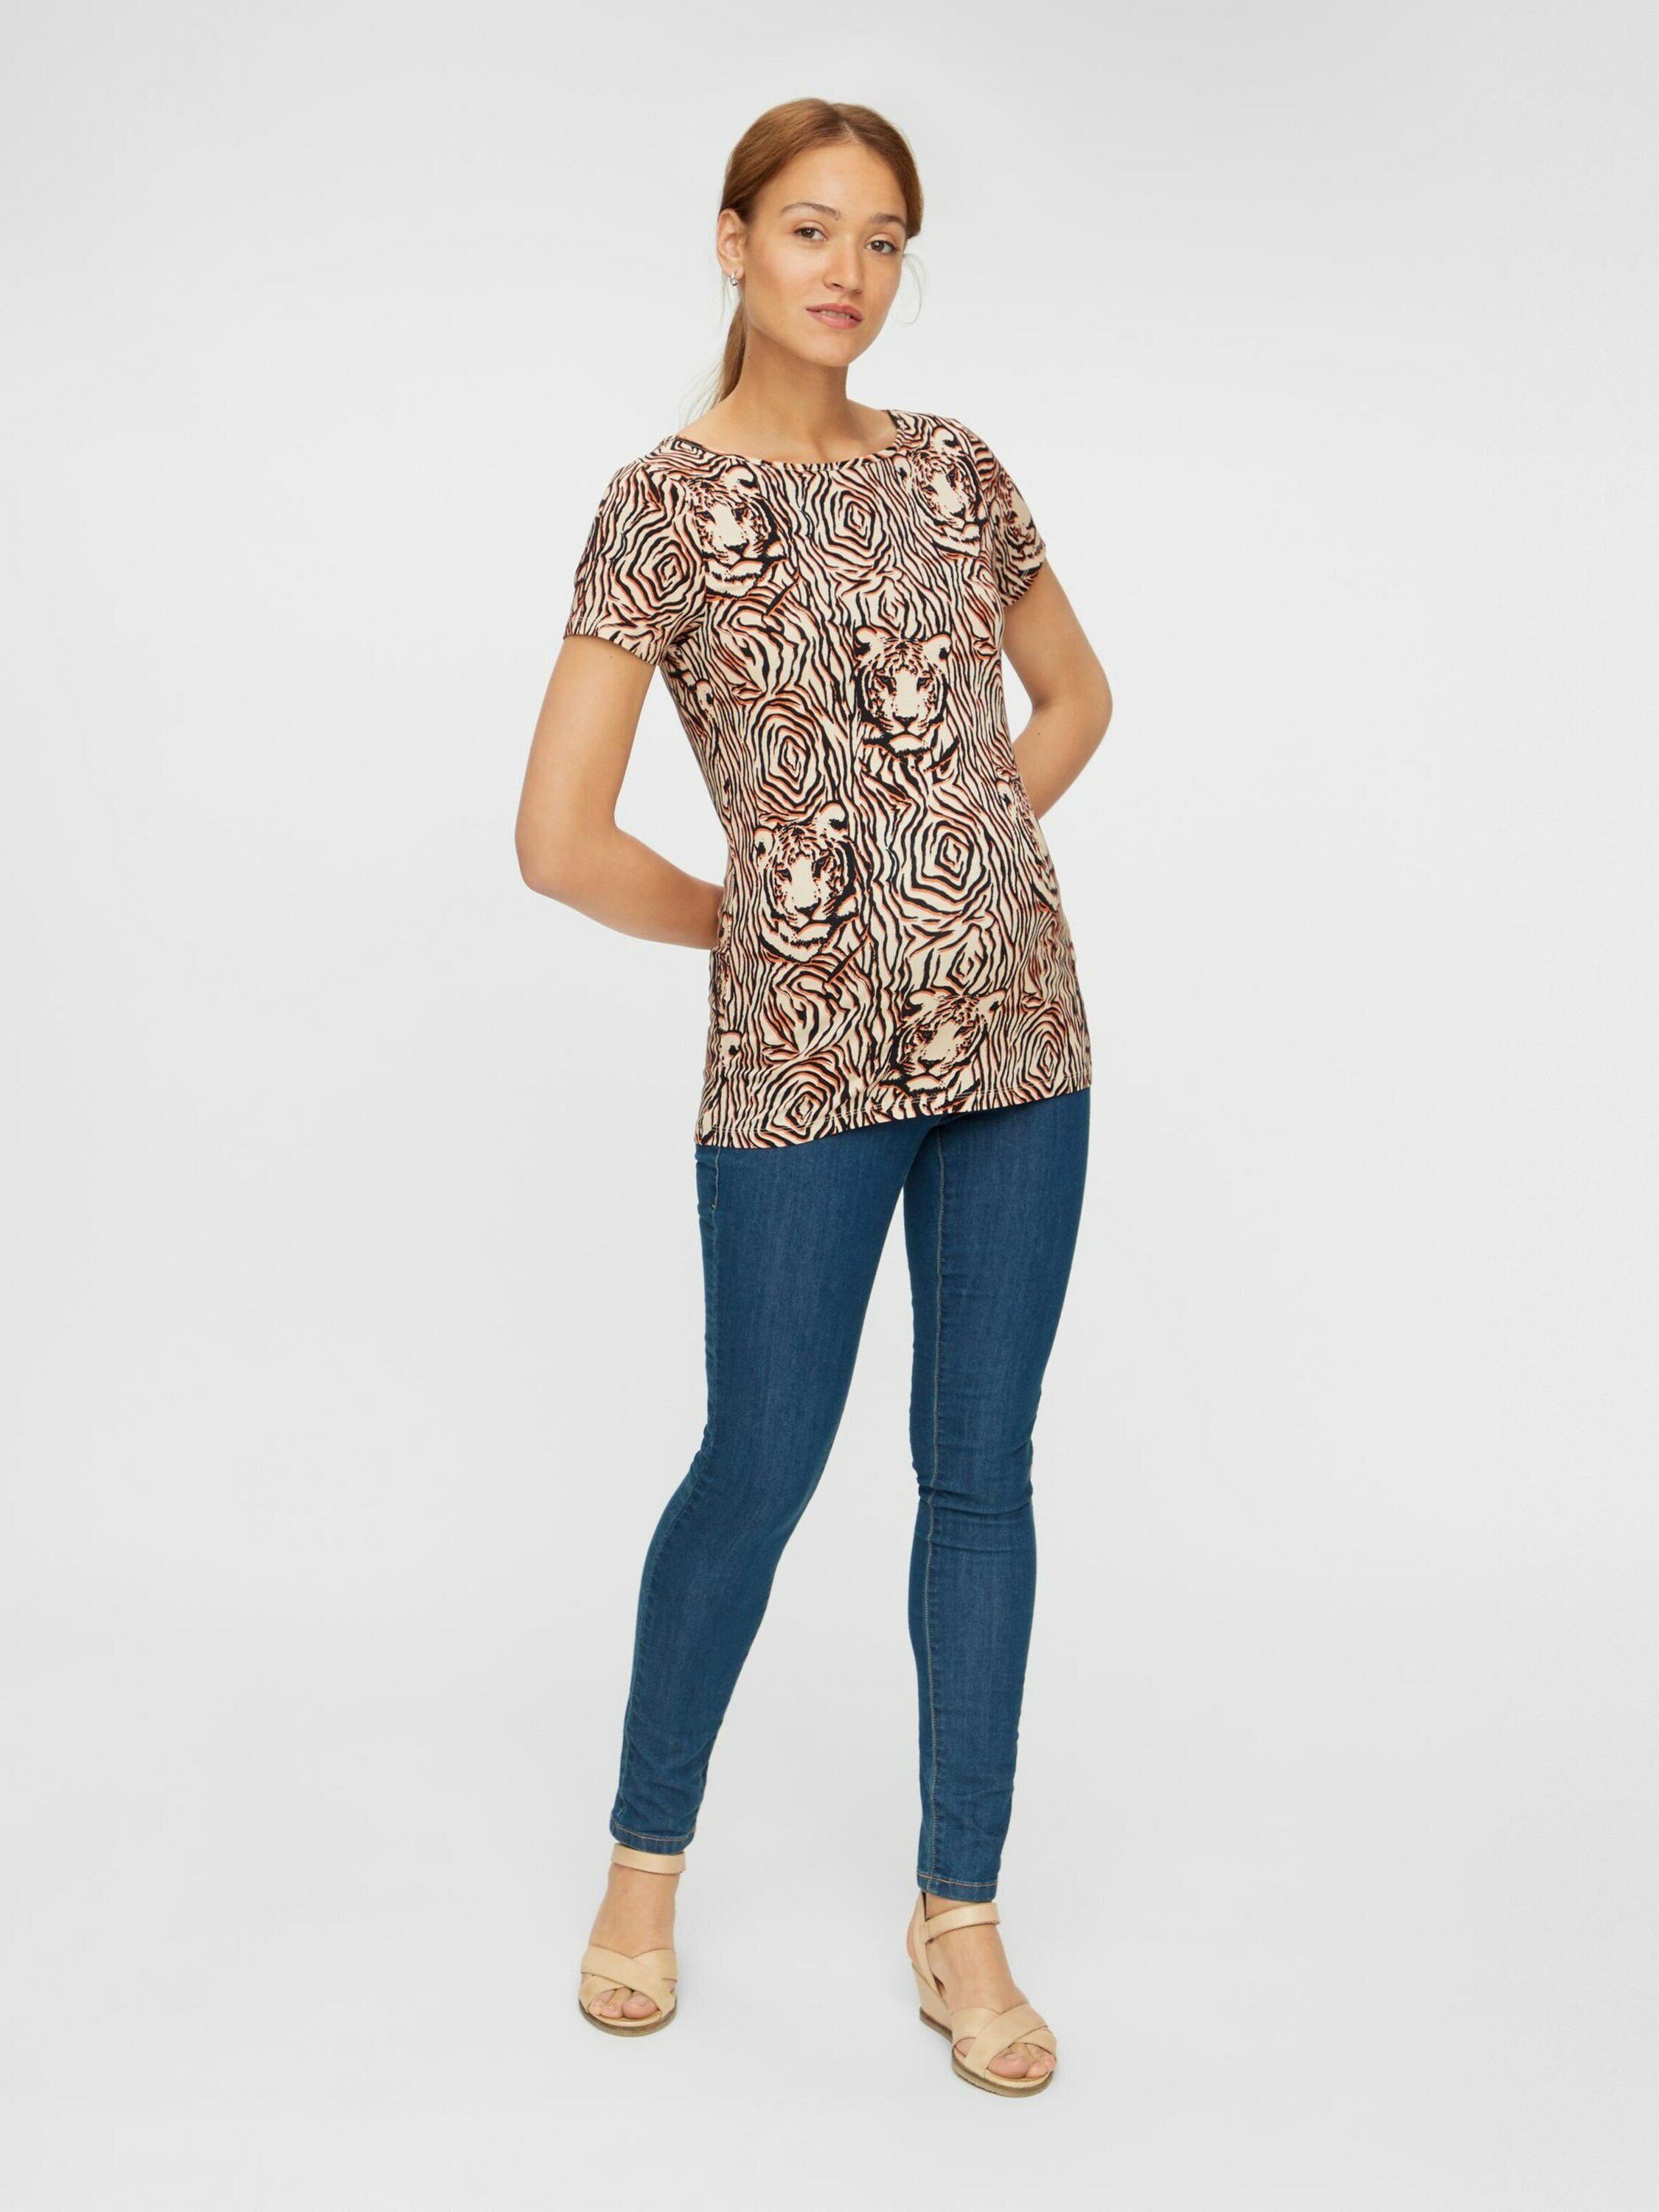 Weiteres Mamalicious (1-tlg) Skinny-fit-Jeans Detail JULIA